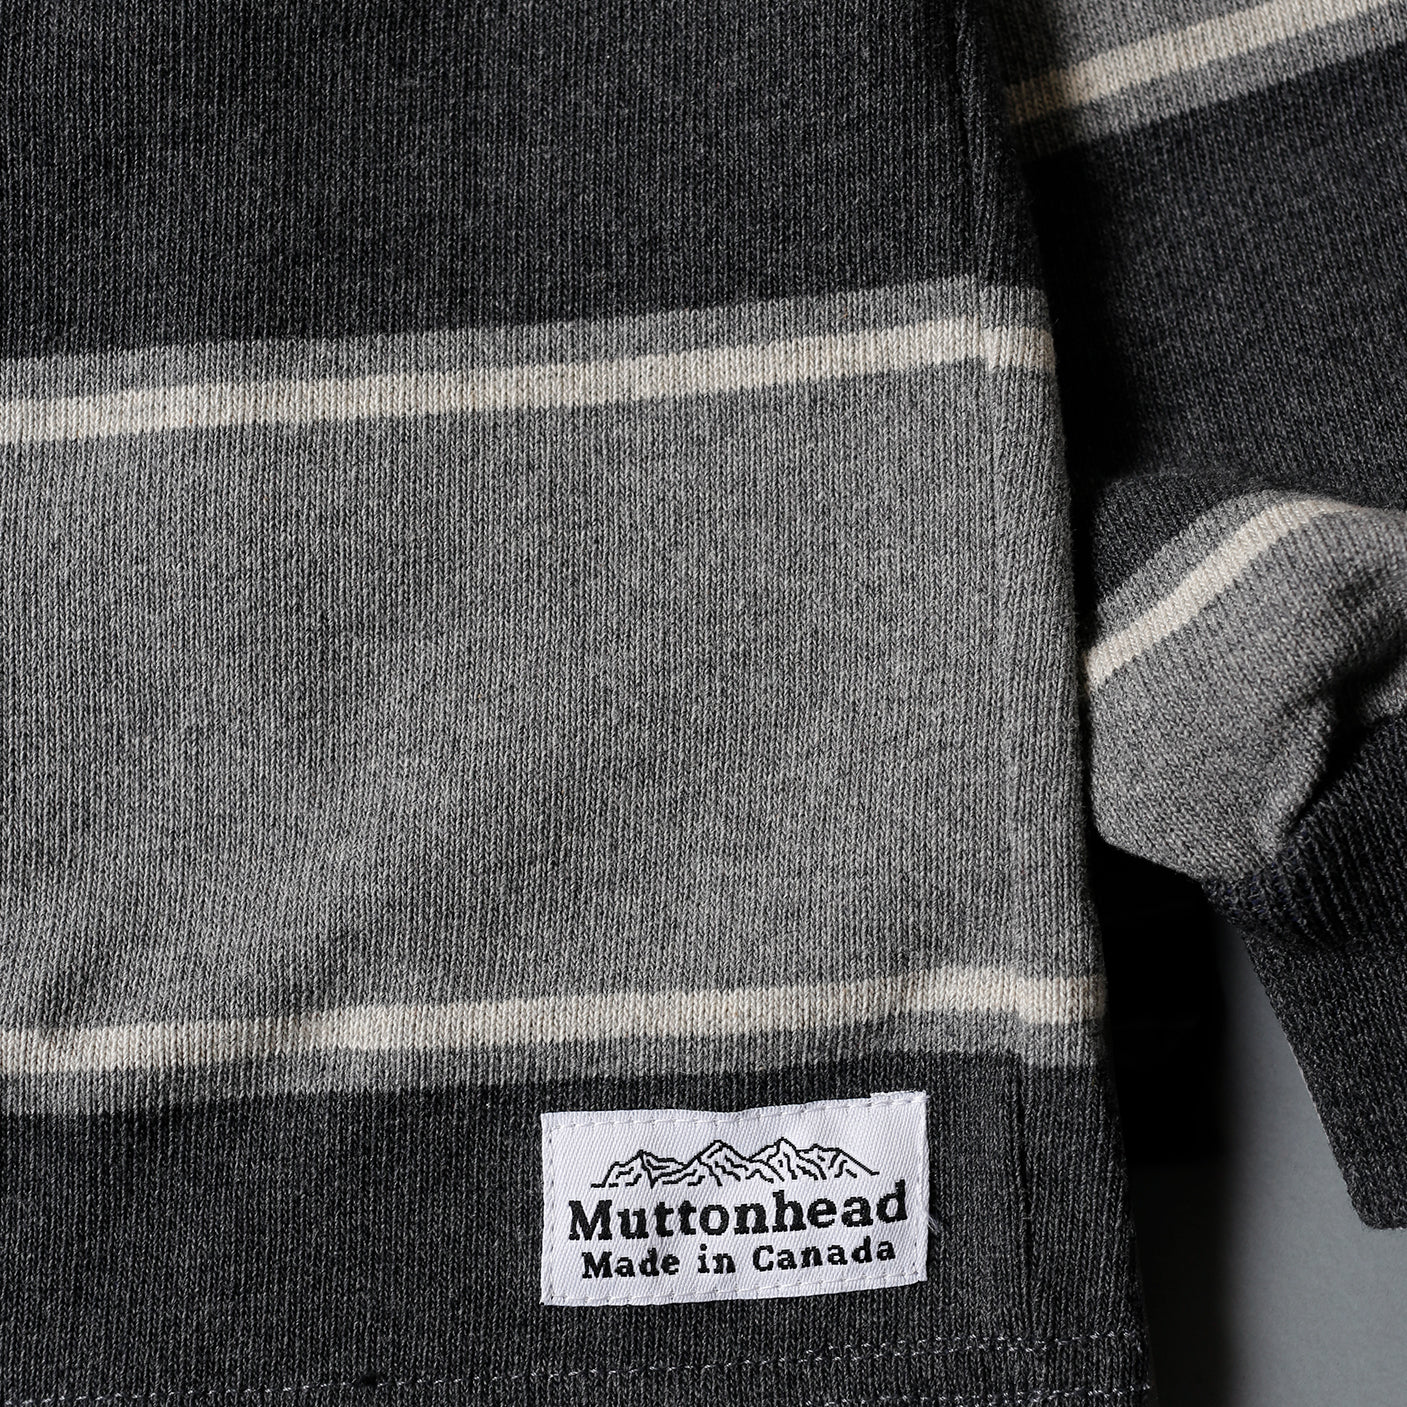 Rugby Shirt - Charcoal Grey